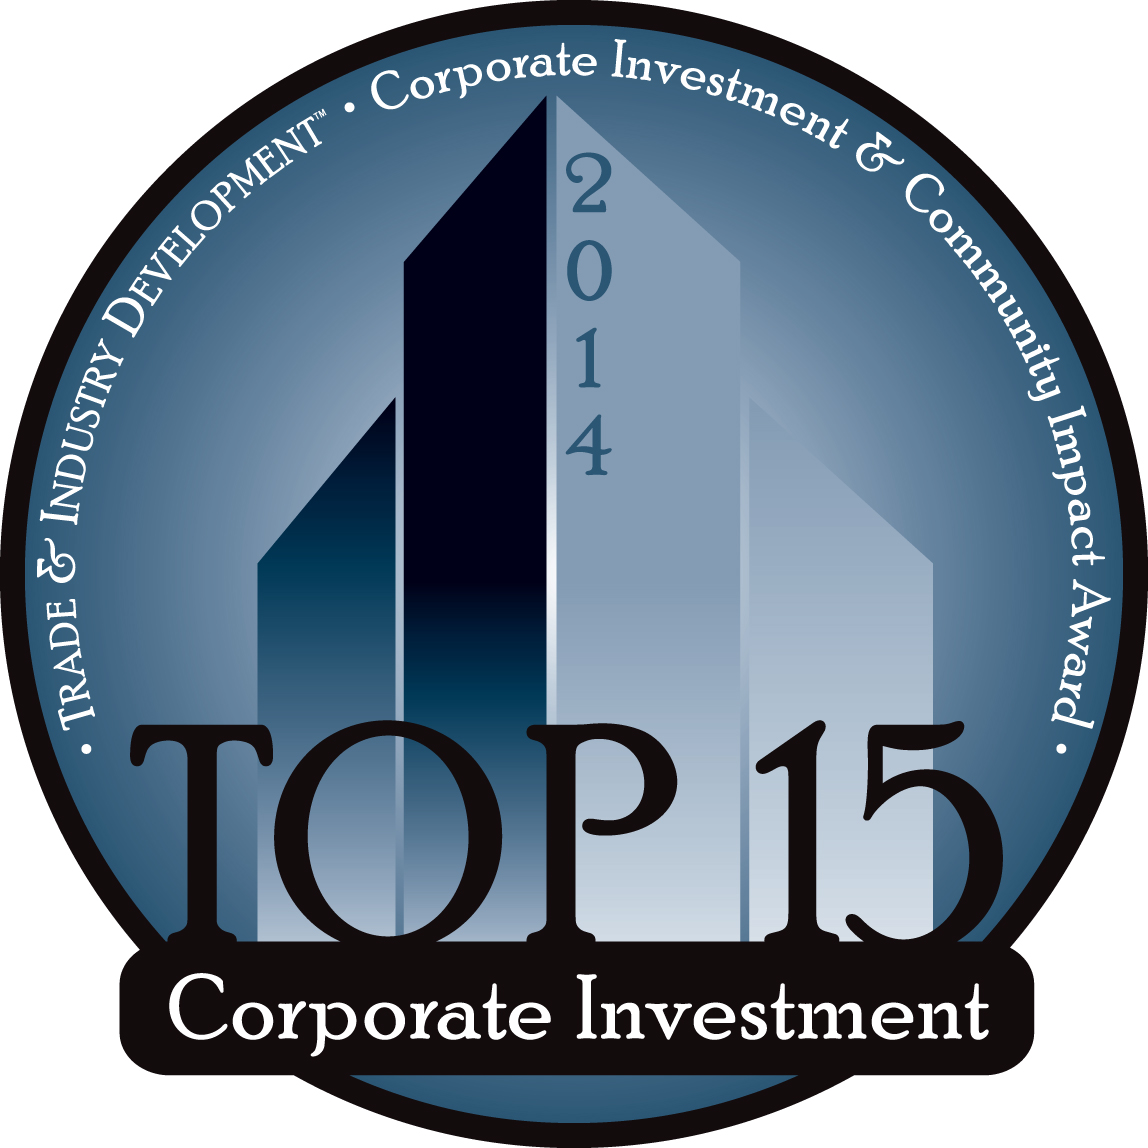 Corporate Investment Awards